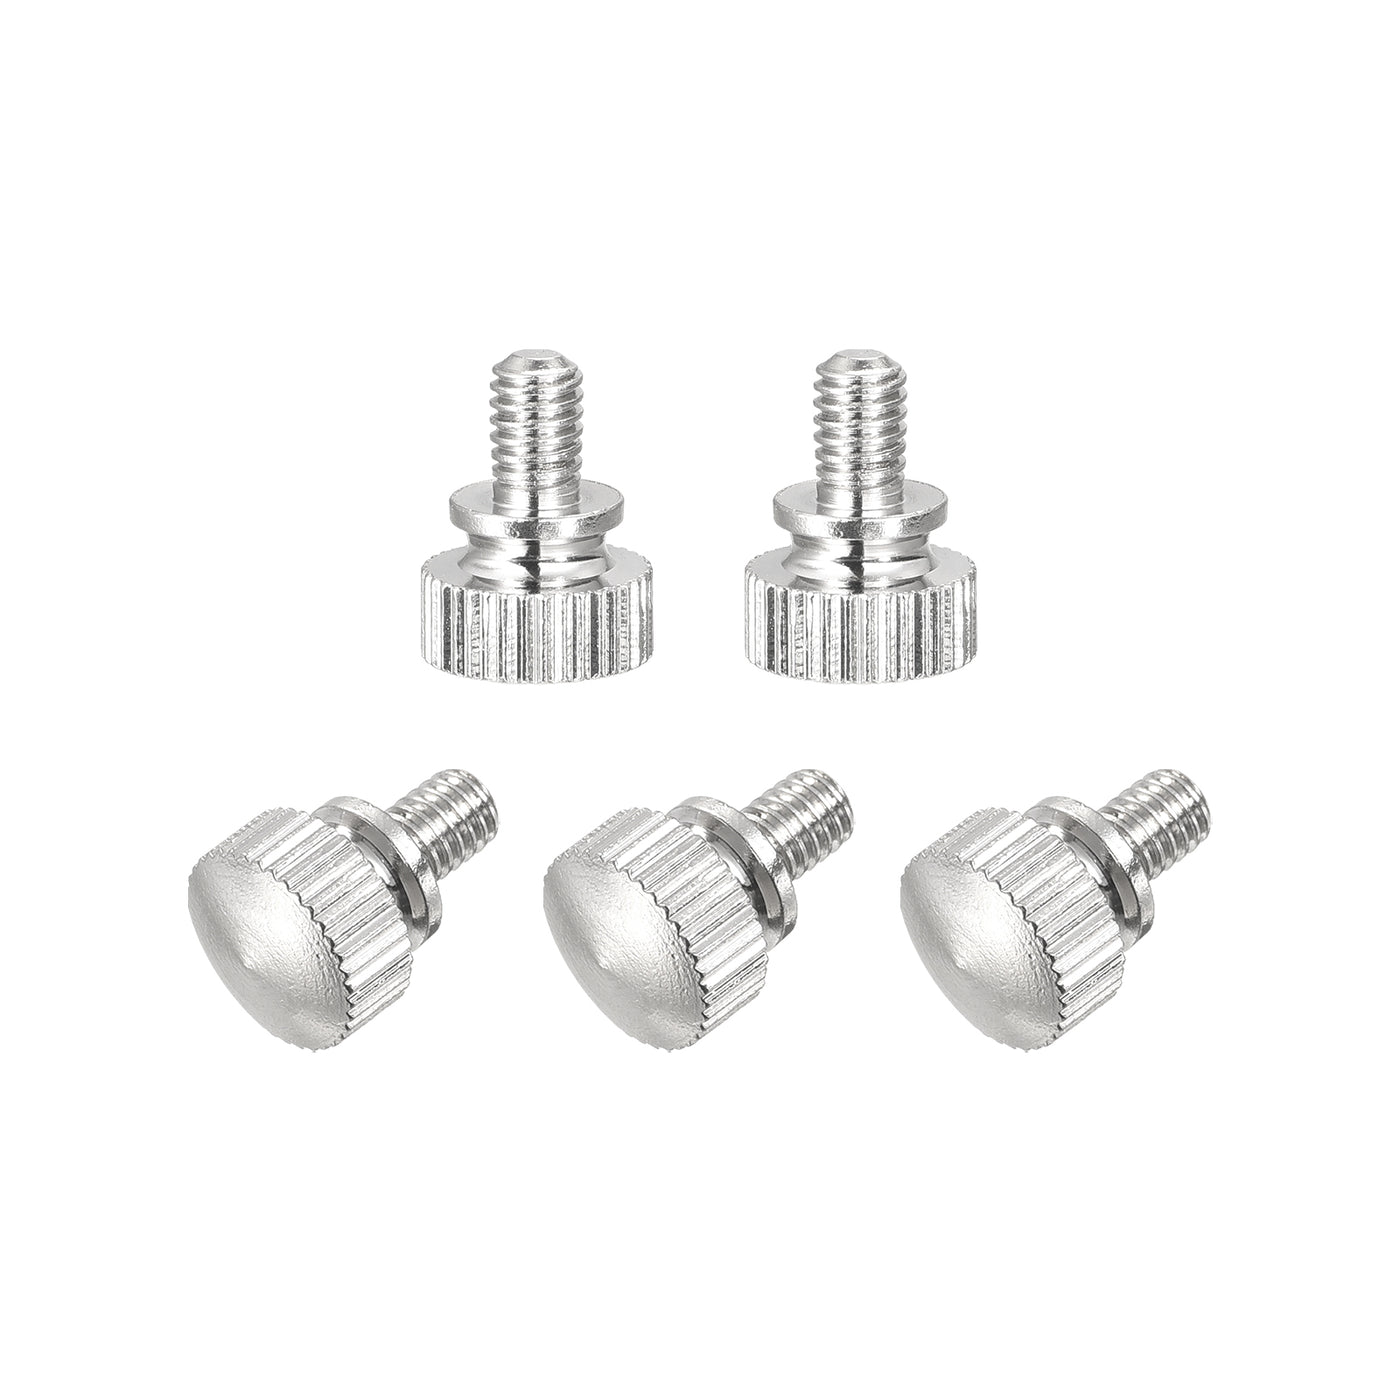 uxcell Uxcell Knurled Thumb Screws, M4x6mm Brass Shoulder Bolts Grip Knobs Fasteners, Nickel Plated 5Pcs